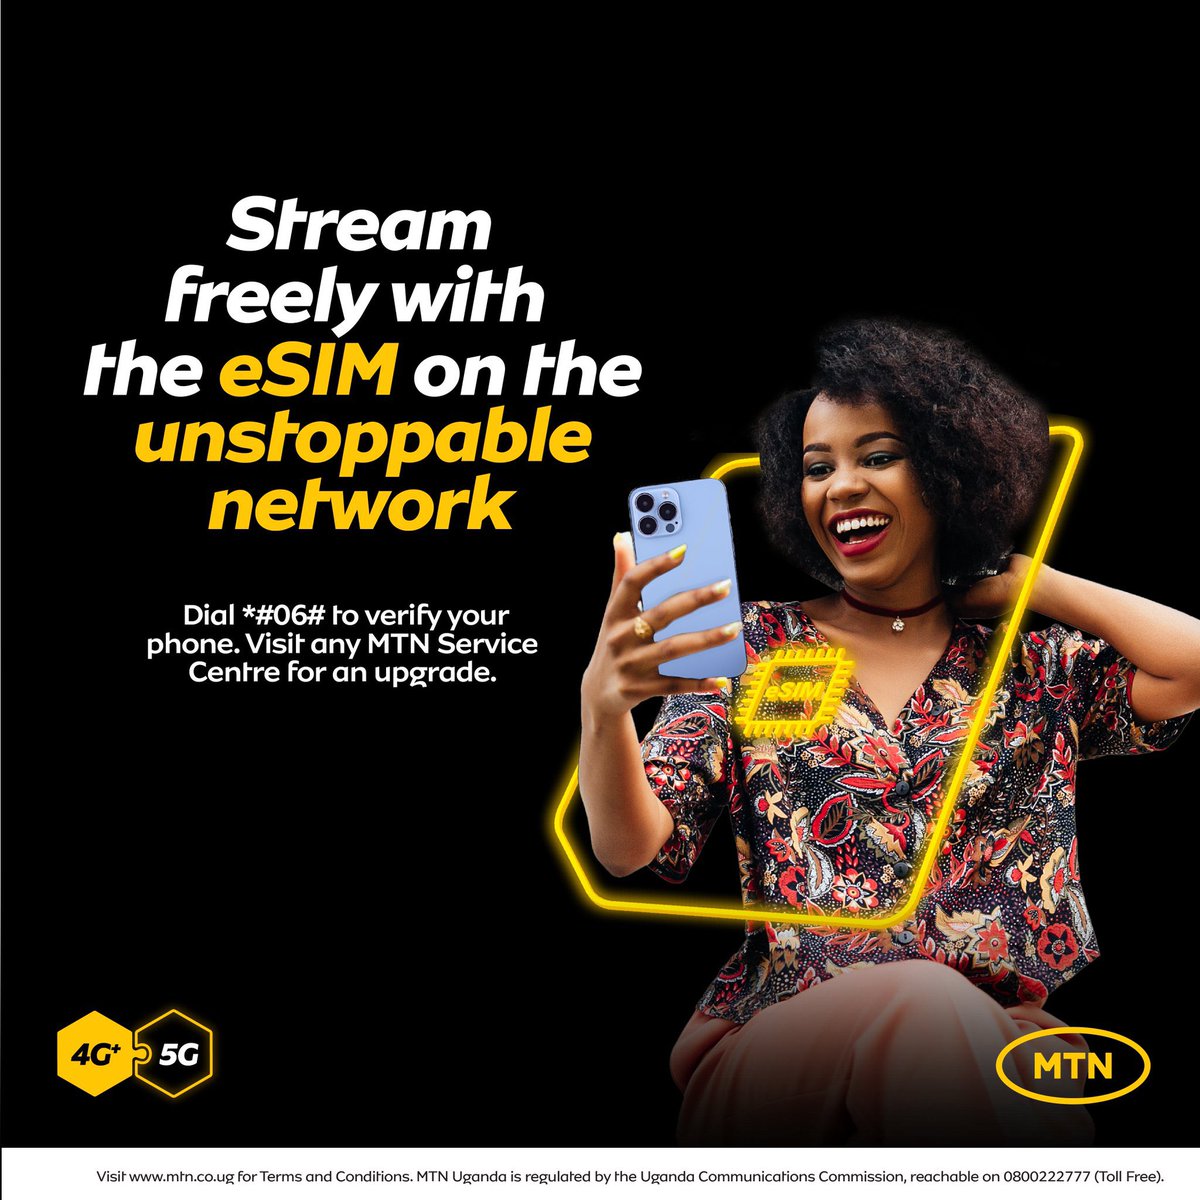 The #UnstoppableNetwork is here to help you stream all your favourite movies and music all week long on the with #MTNeSIM.  Dial *#06# to verify. 
#TogetherWeAreUnstoppable